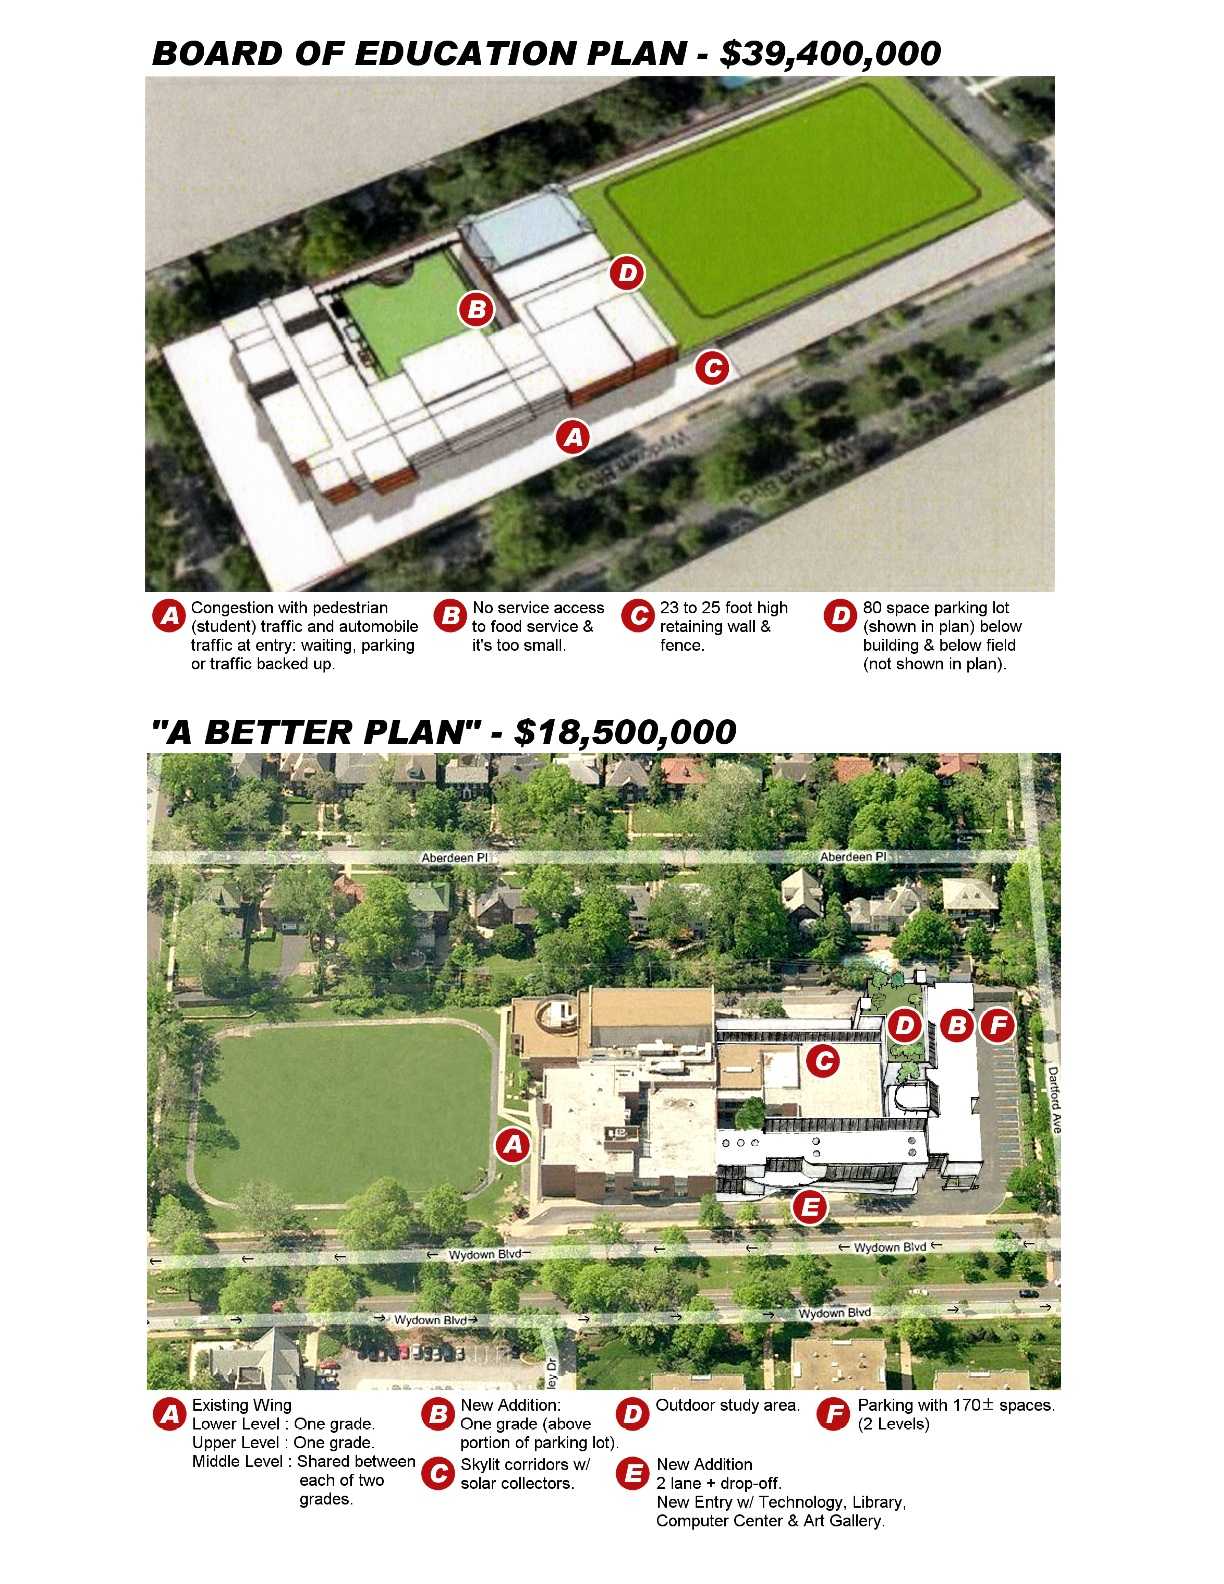 Contrasting views of the plans included in Prop W (above) and Roth's plans (below).  (Images courtesy of Michael Roth)